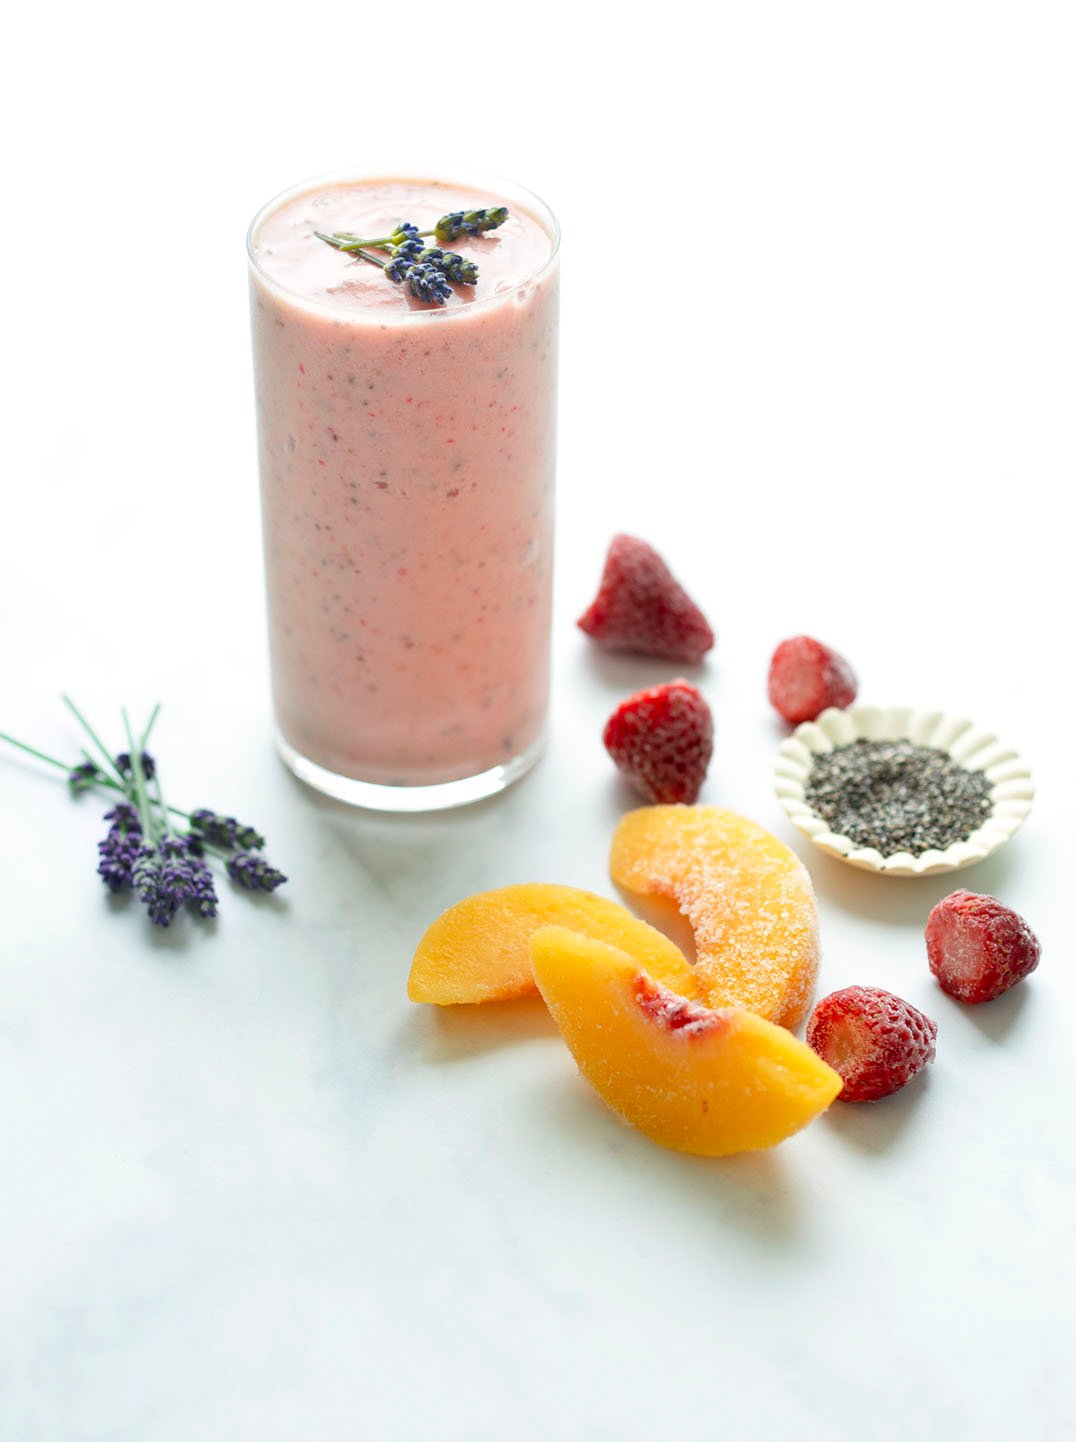 A tall glass filled with a pink smoothie surrounded by ingredients including peach strawberries and lavendar